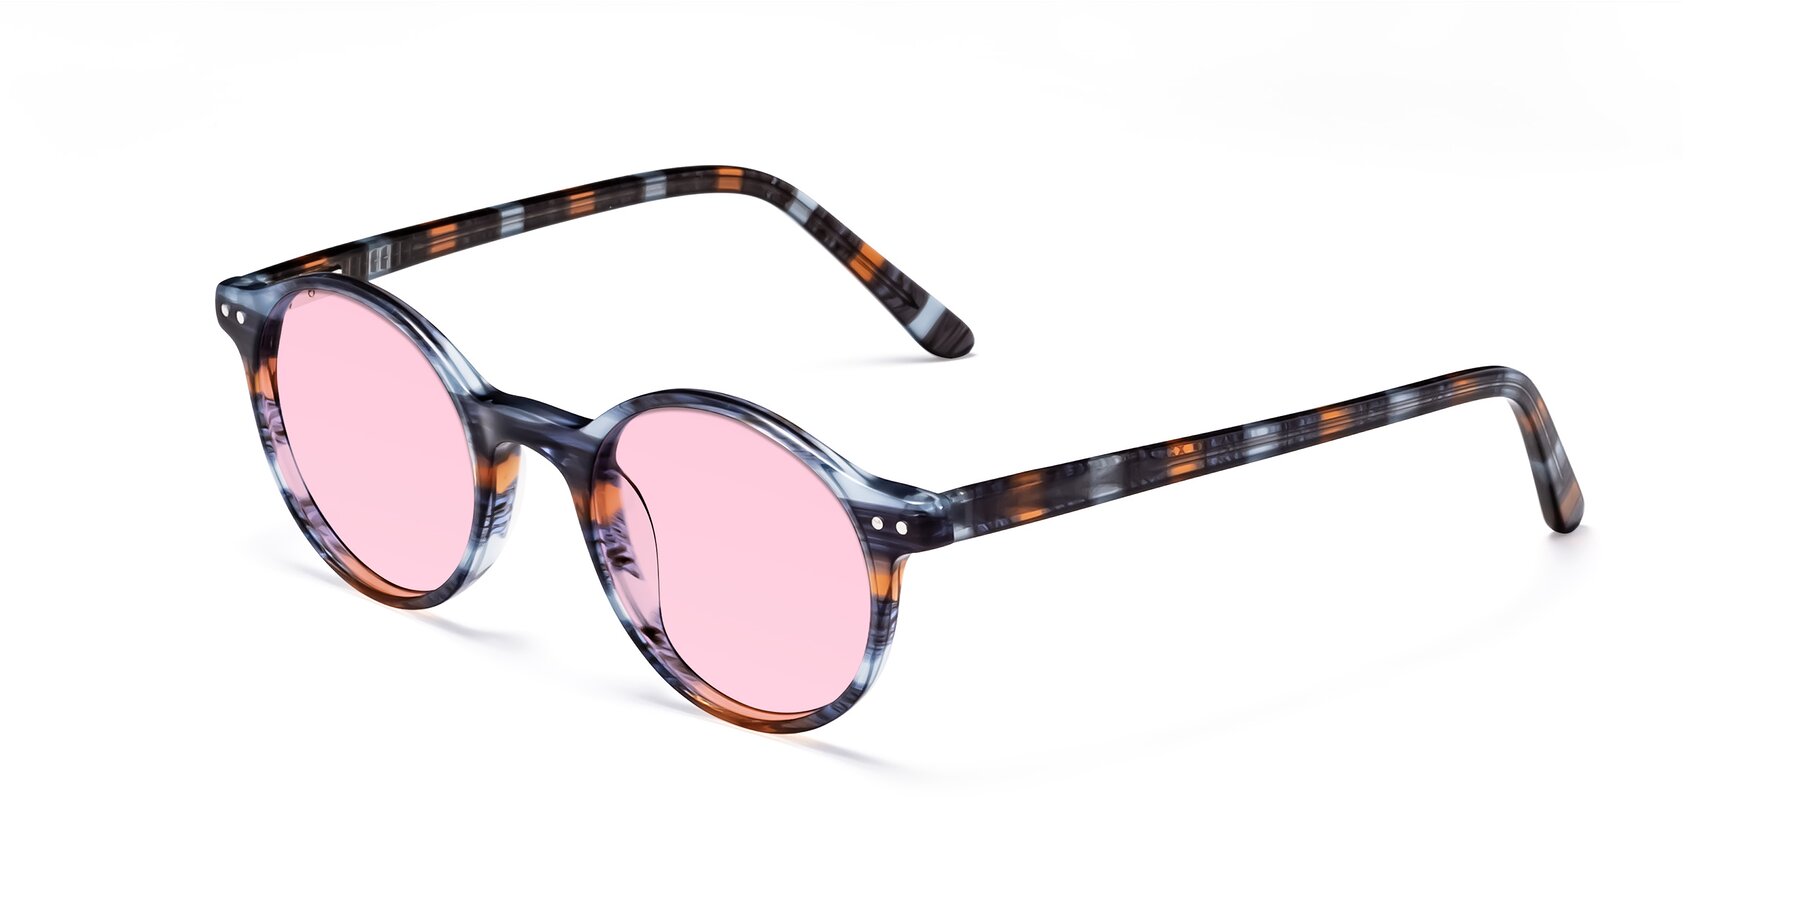 Angle of Jardi in Stripe Blue Brown with Light Pink Tinted Lenses